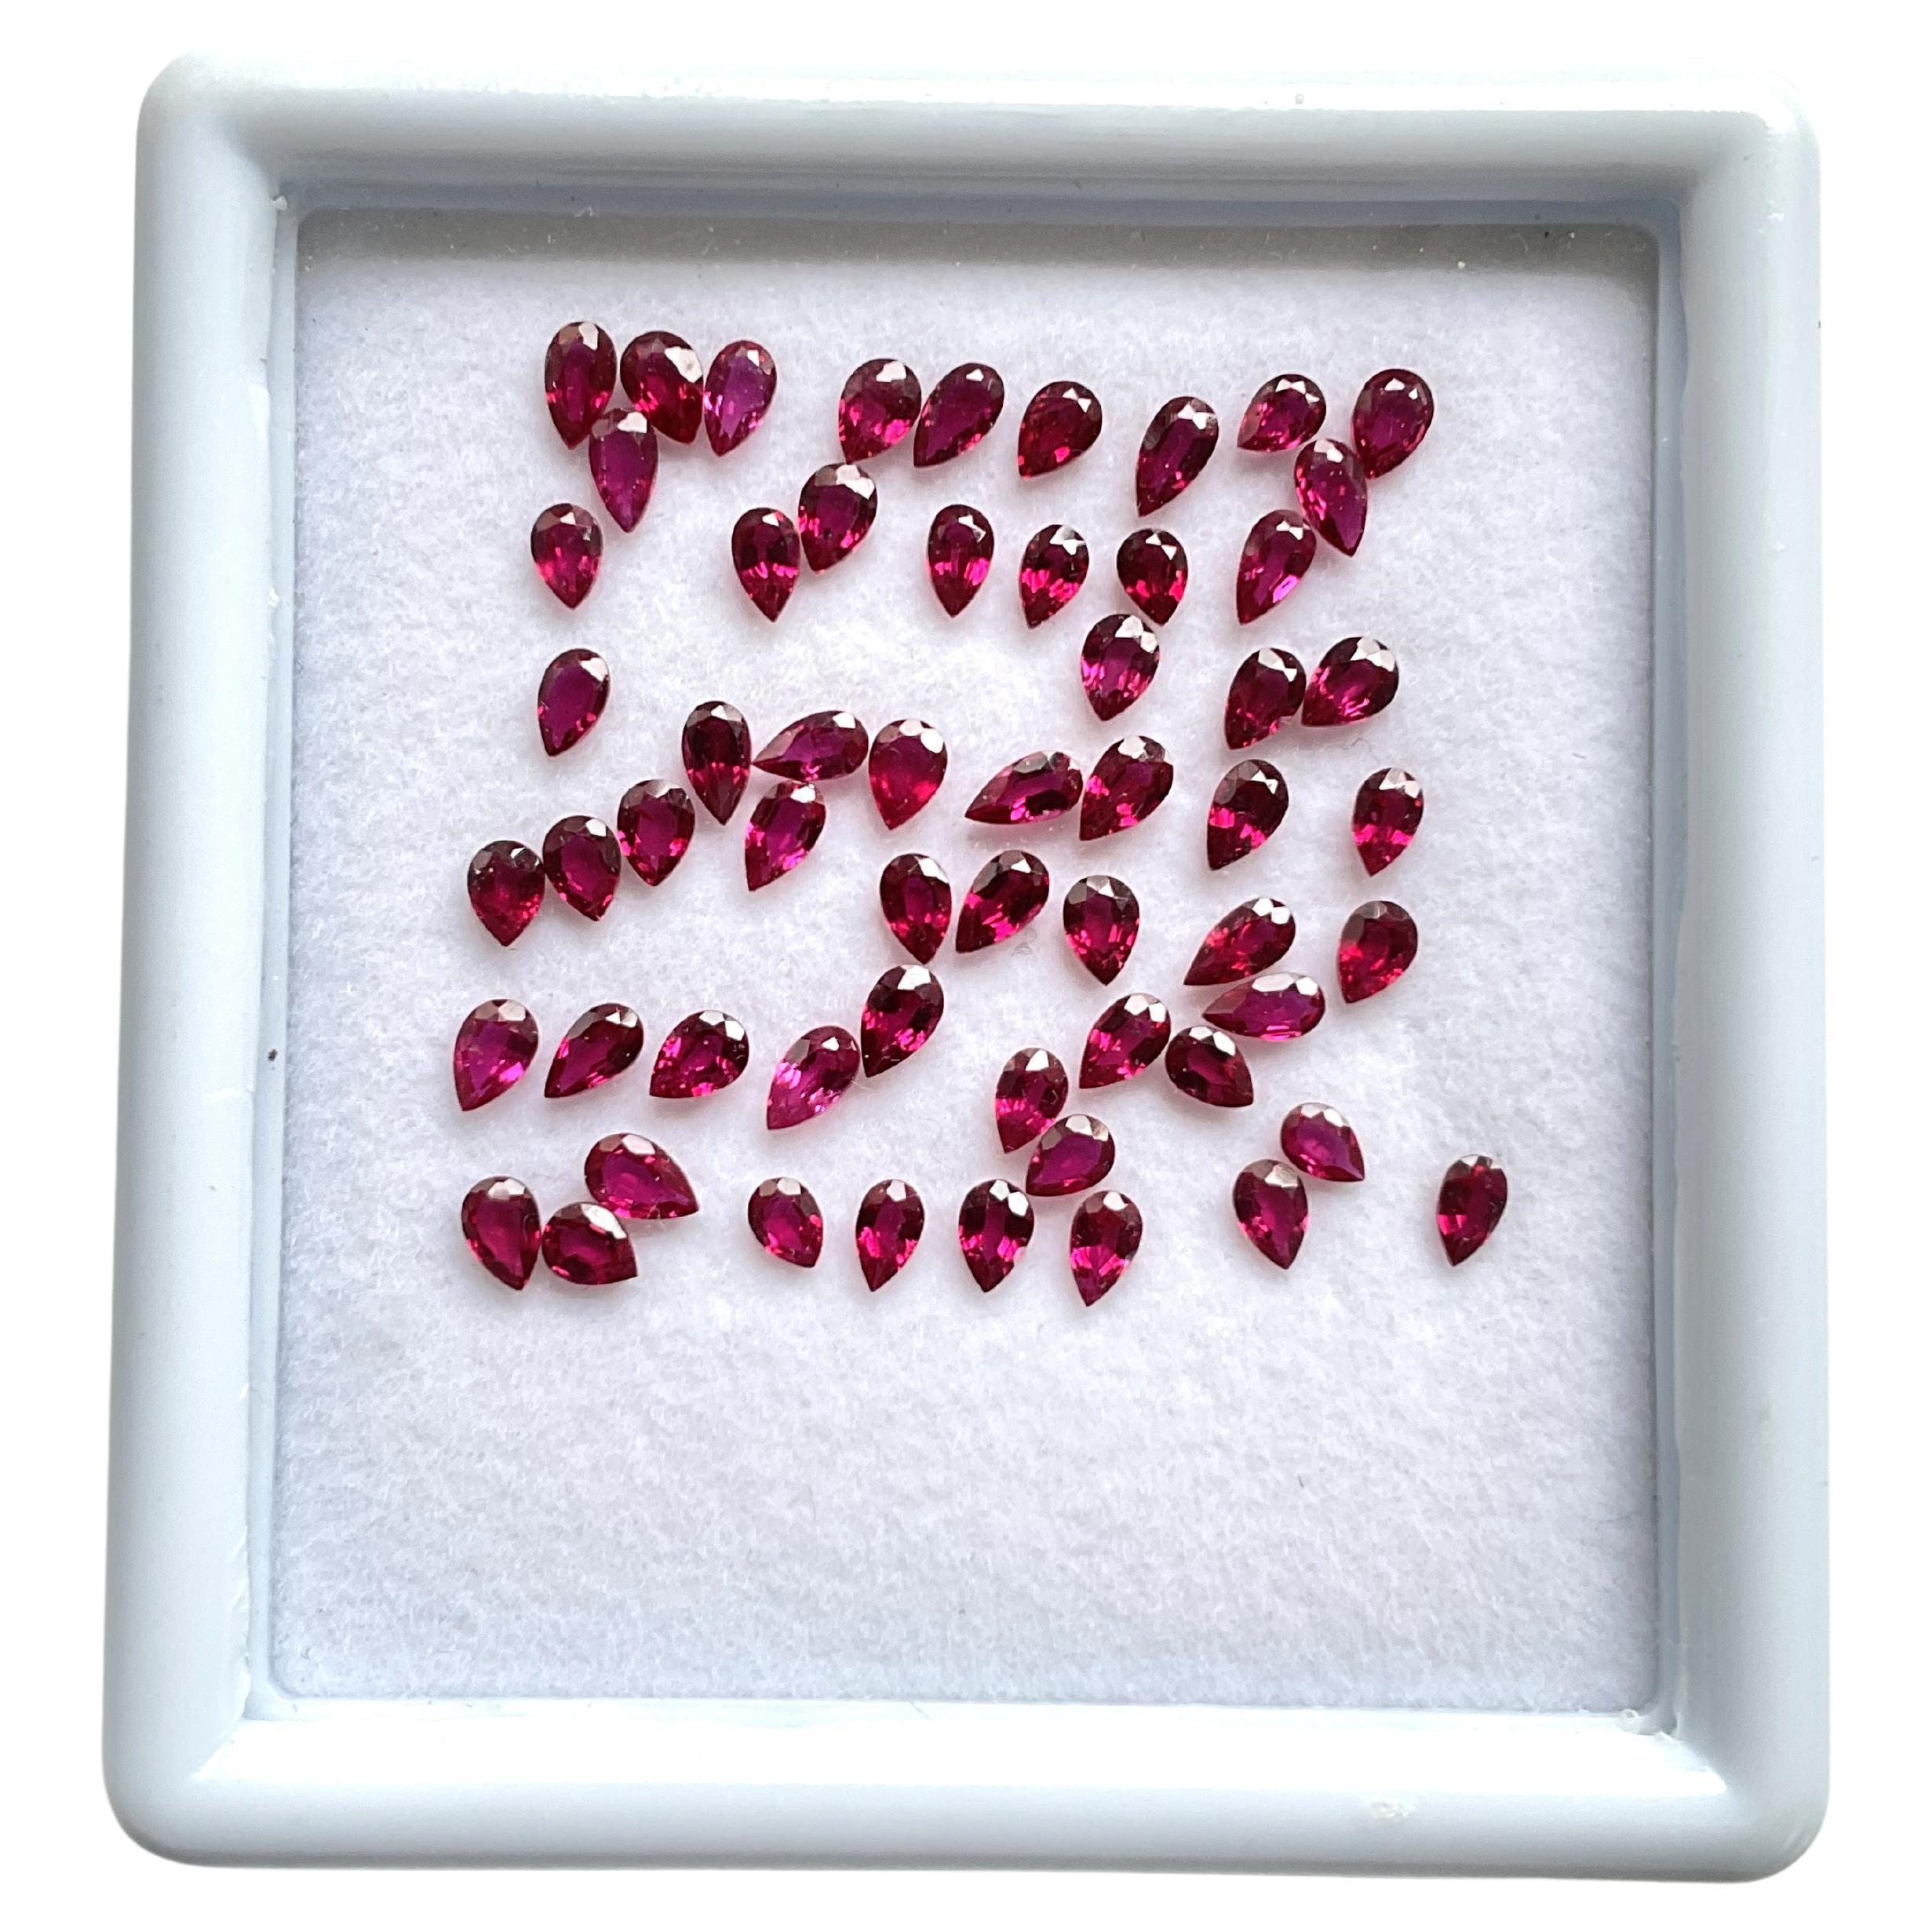 8.21 Carats Mozambique Ruby Top Quality Pear Cut stone No Heat Natural Gemstone For Sale